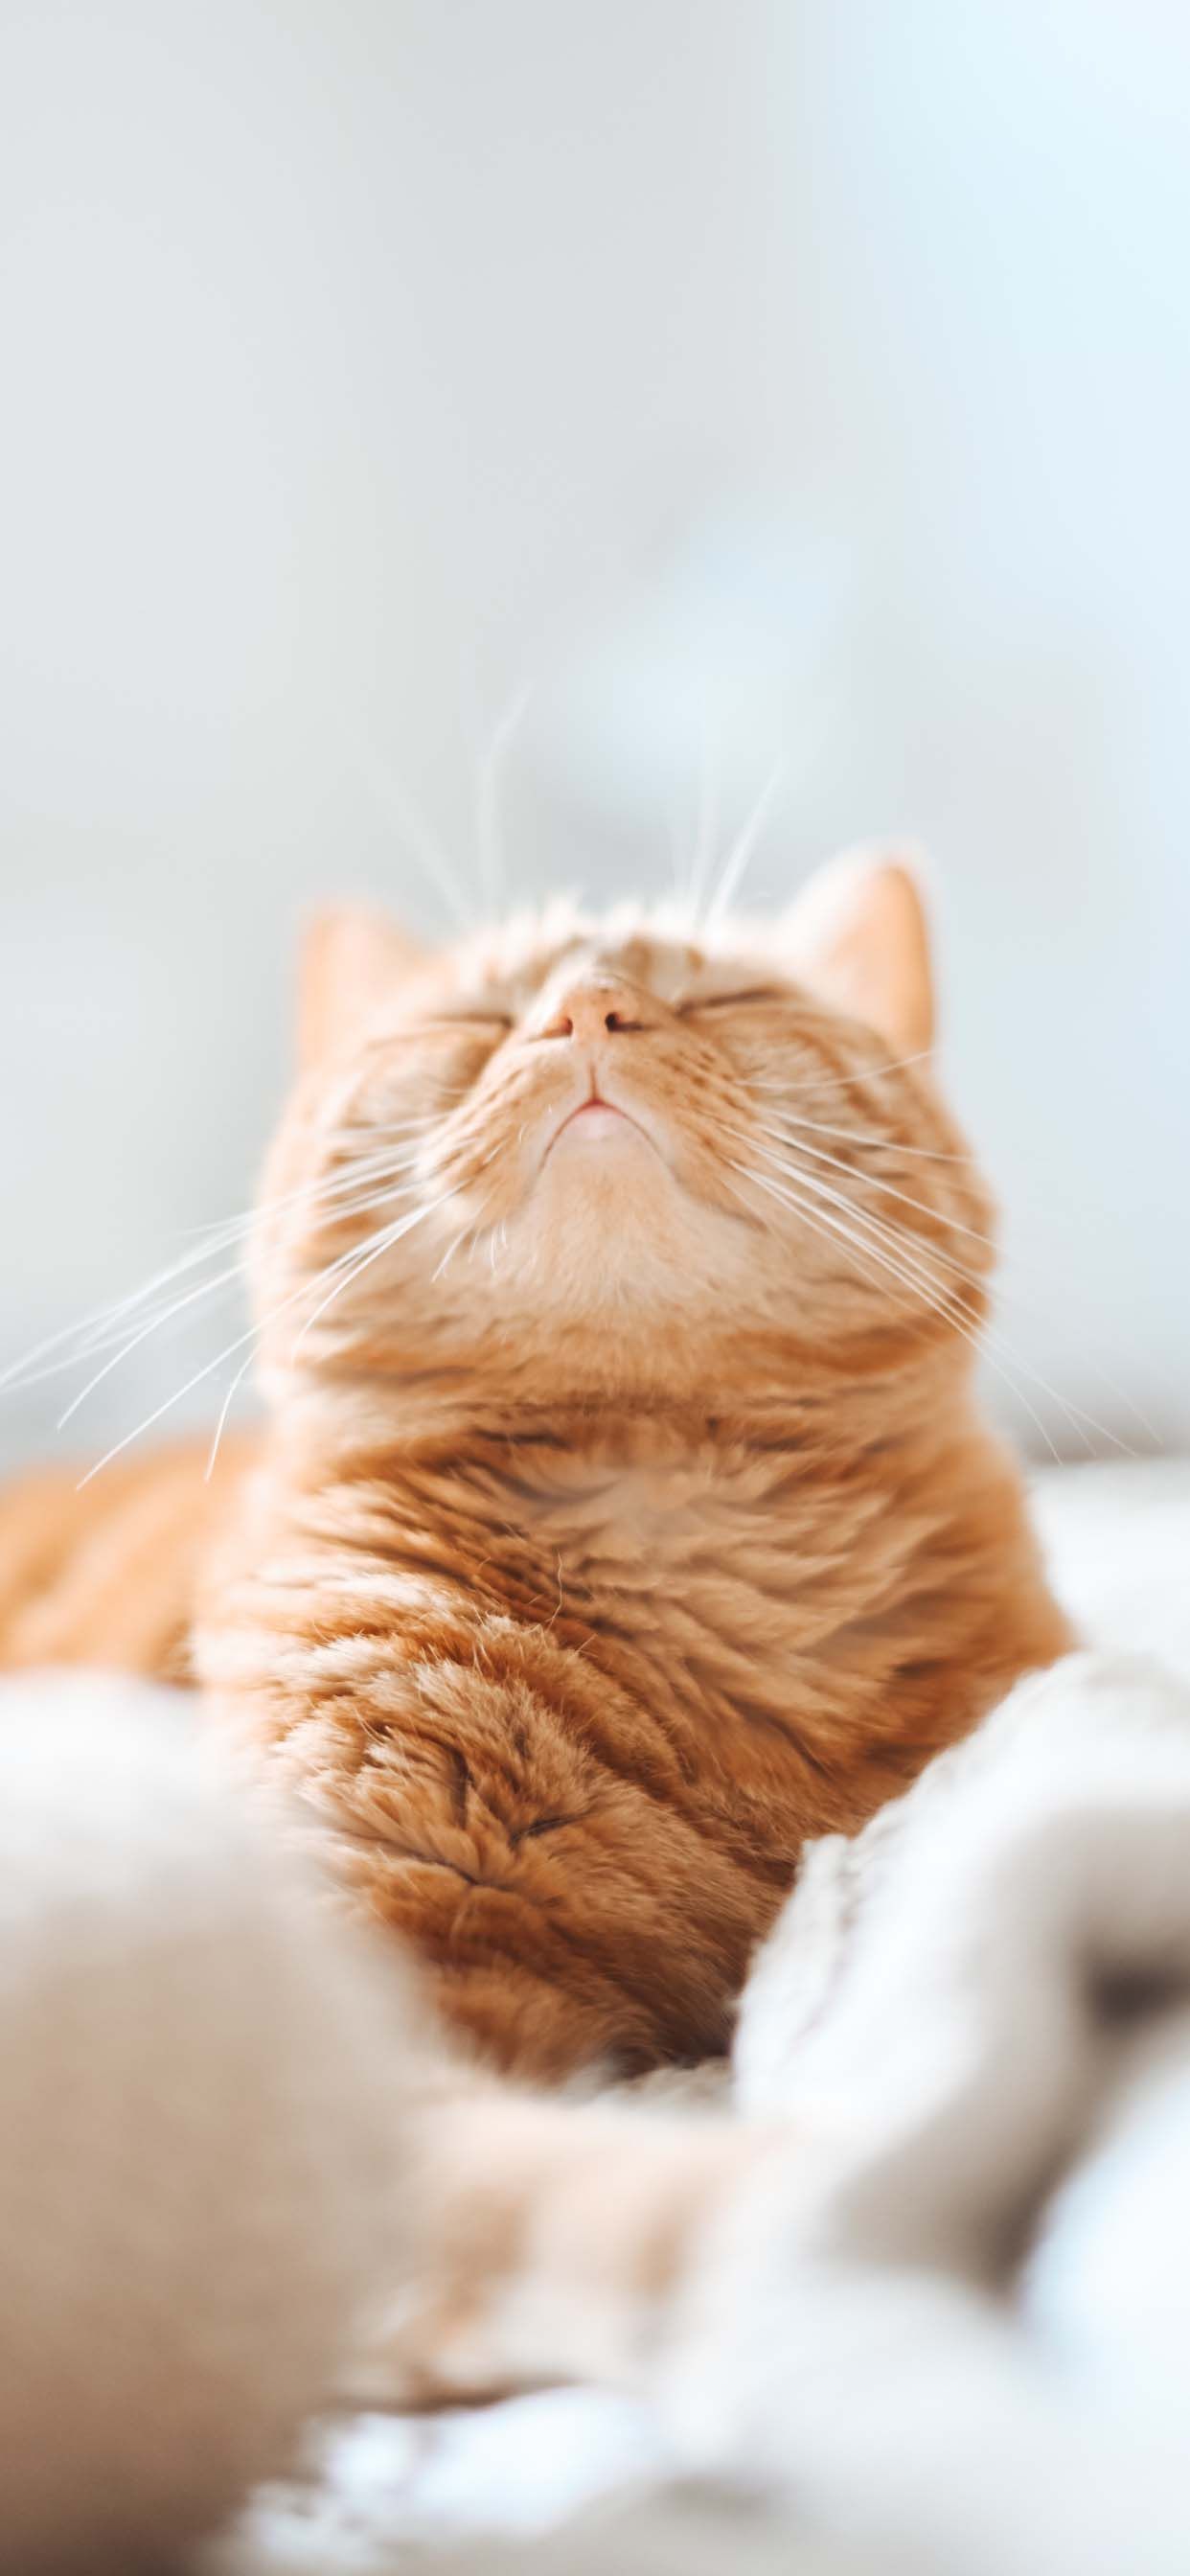 10 Beautiful Cat Wallpapers For Your iPhone 11 in 2020